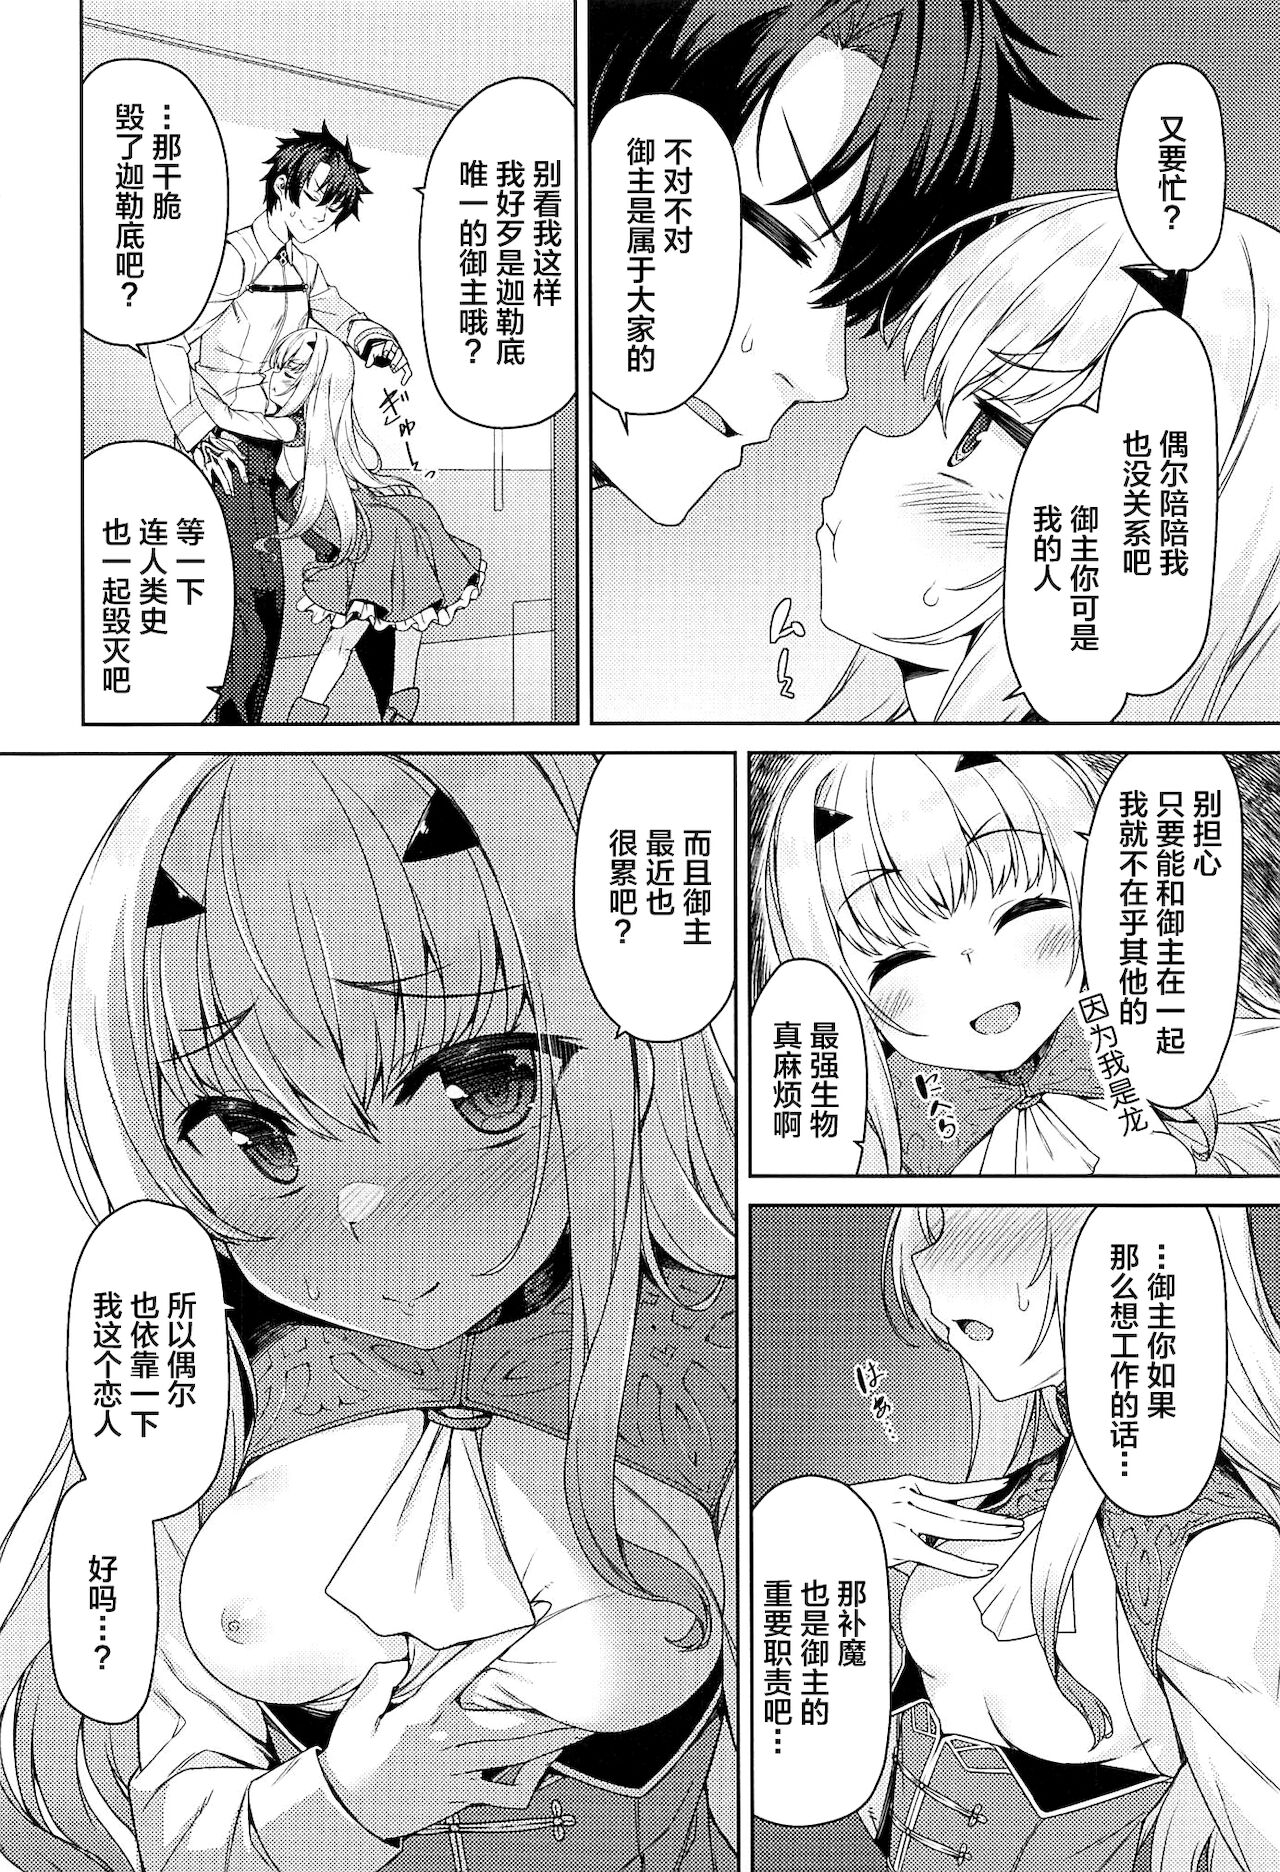 (C99) [Monochrome Circuit (racer)] Datte Ryuu nanode (Fate/Grand Order) [Chinese] [黎欧x苍蓝星汉化组] (C99) [ものくろサーキット (racer)] だって竜なので (Fate/Grand Order) [中国翻訳]